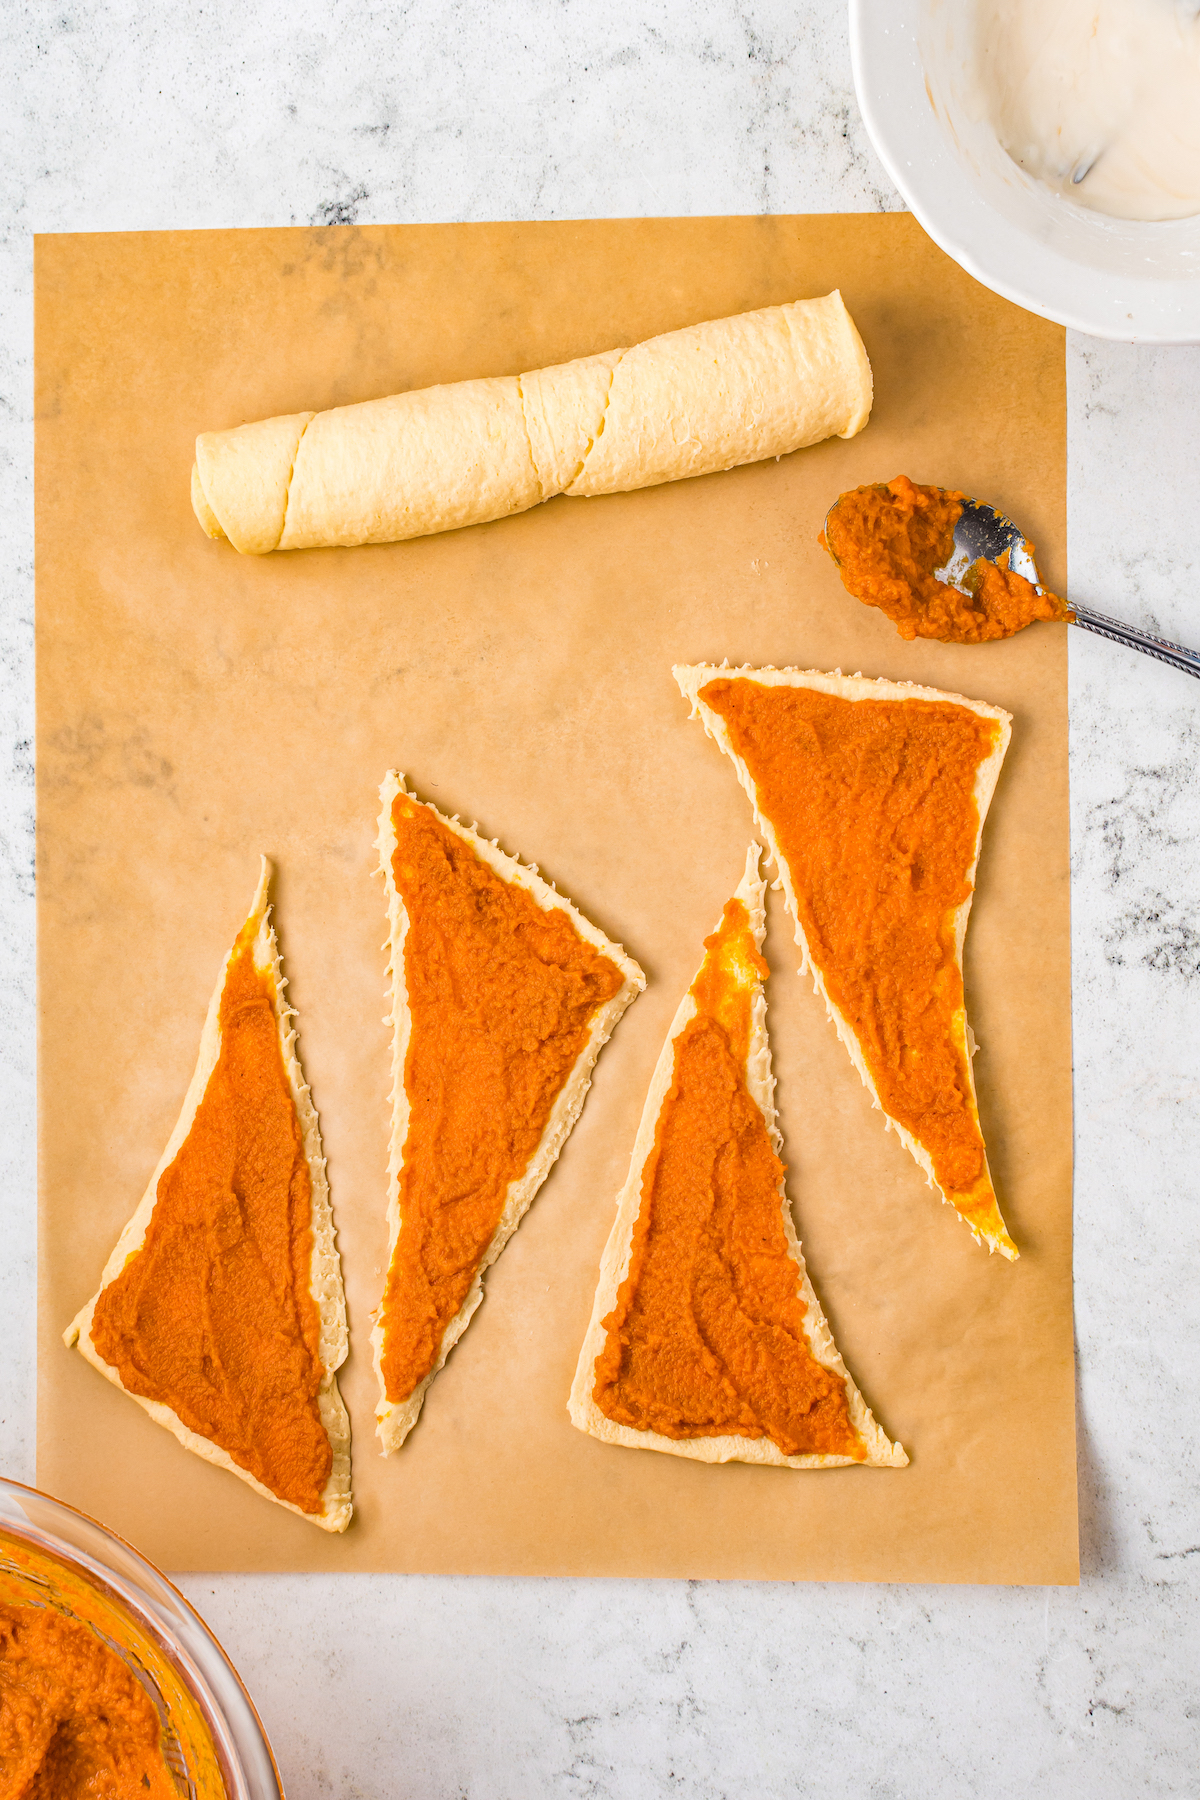 Pumpkin pie filling being spread over triangles of crescent dough.